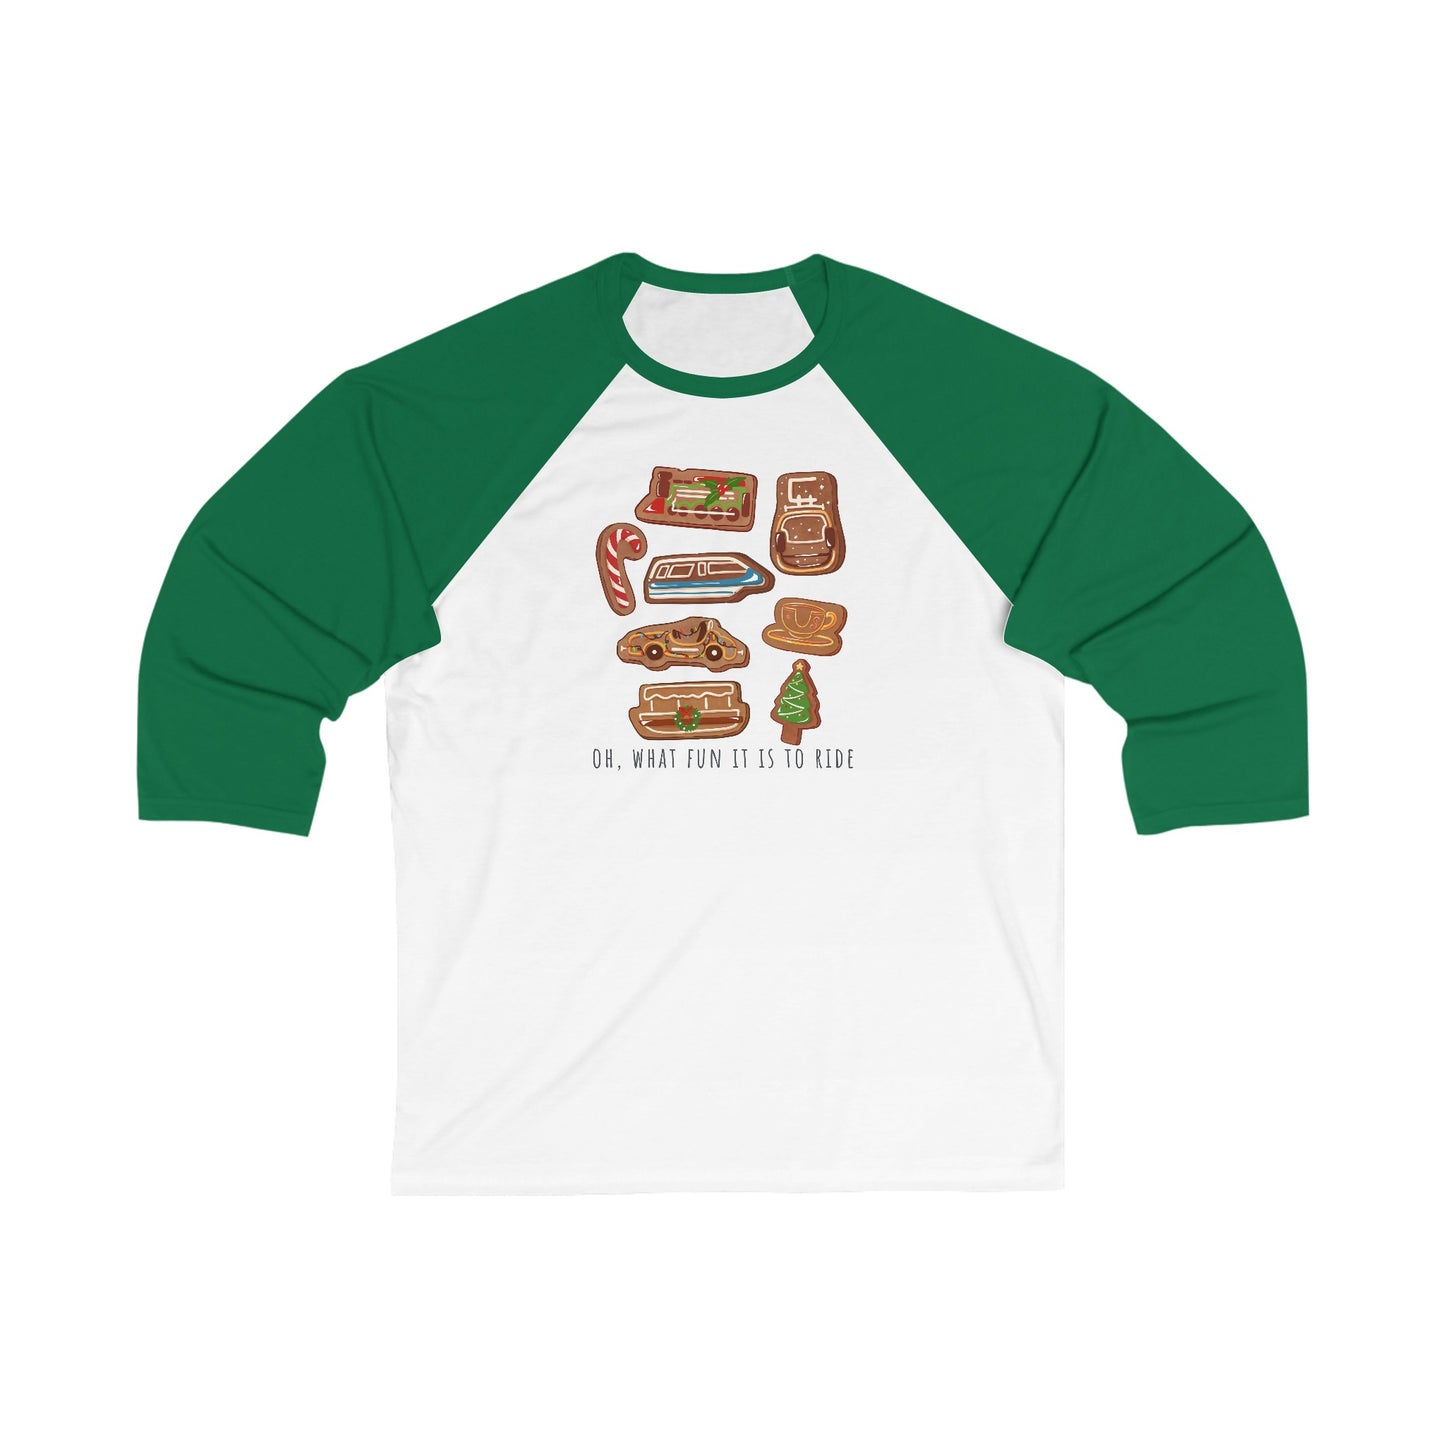 Oh What Fun it is to Ride - Unisex 3\4 Sleeve Baseball Tee